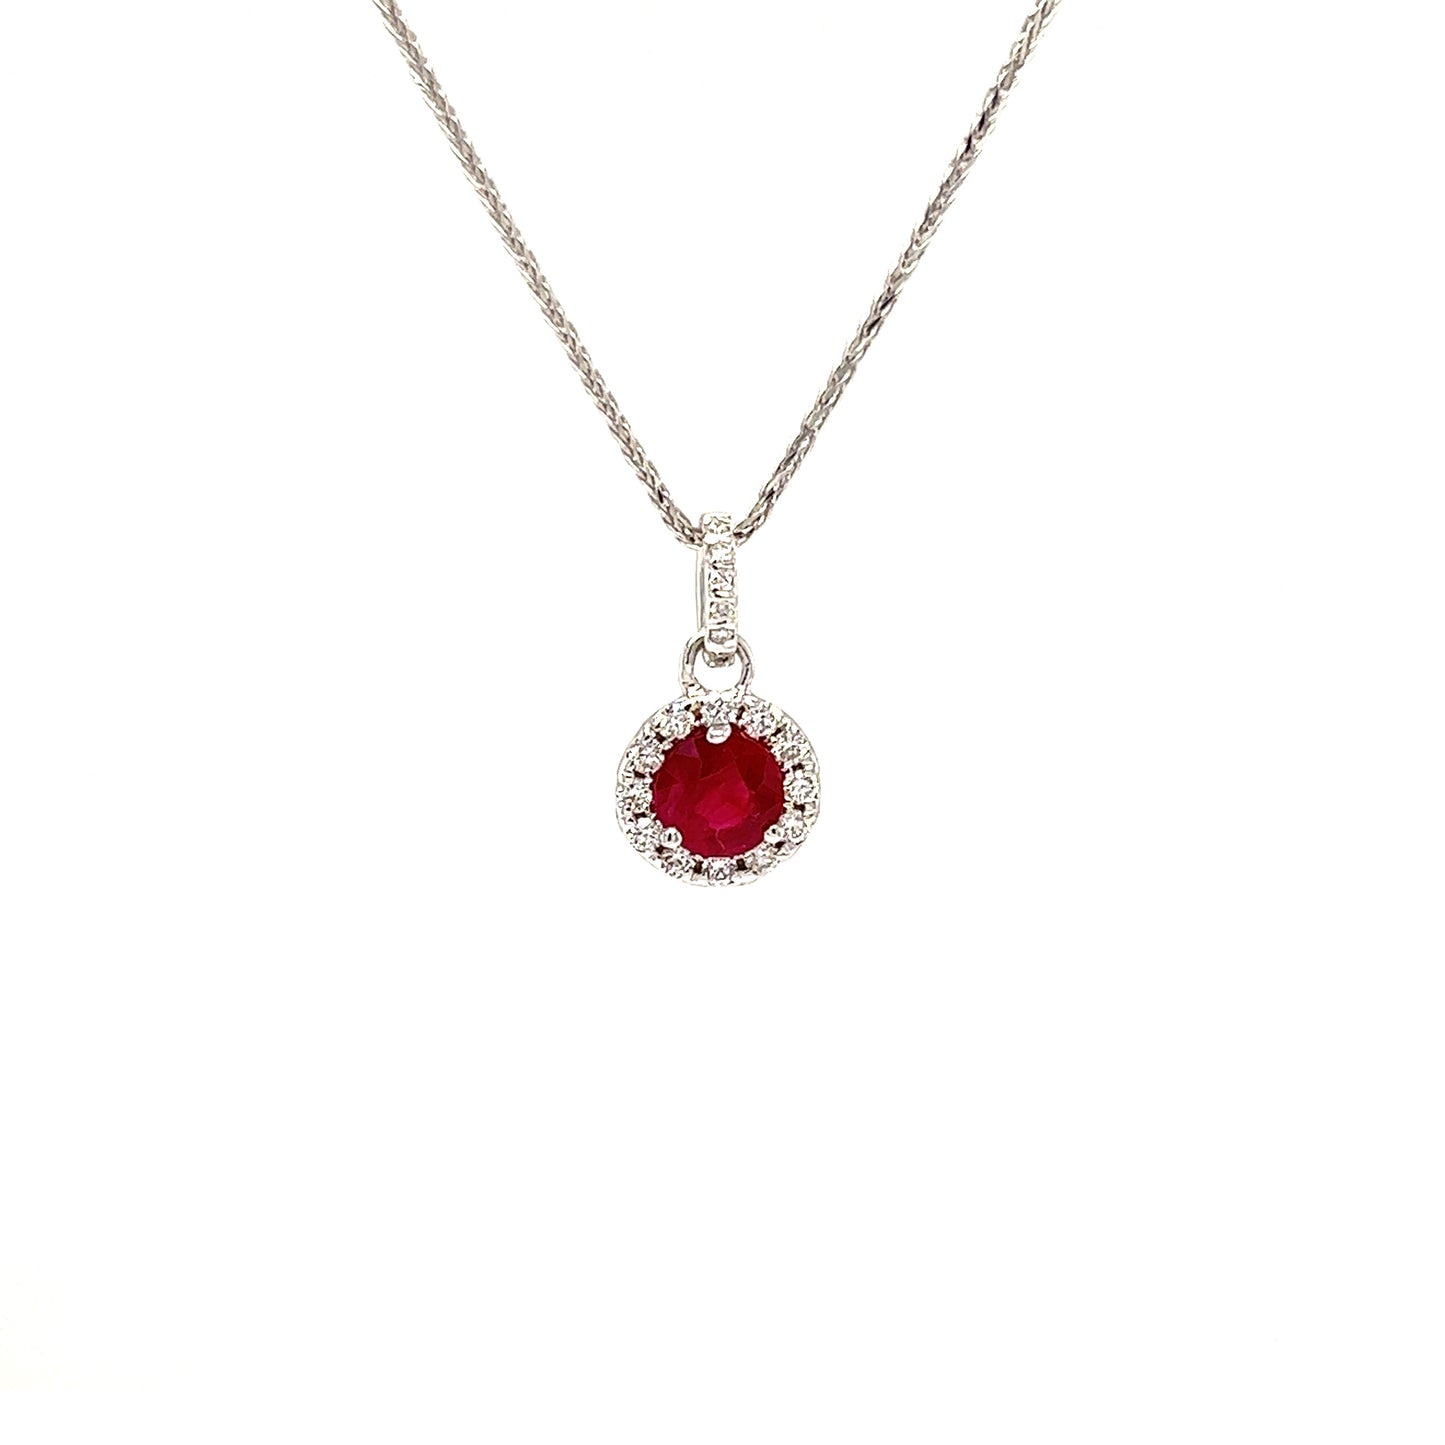 Round Ruby Pendant with Diamond Halo in 14K White Gold Pendant and Chain Front View